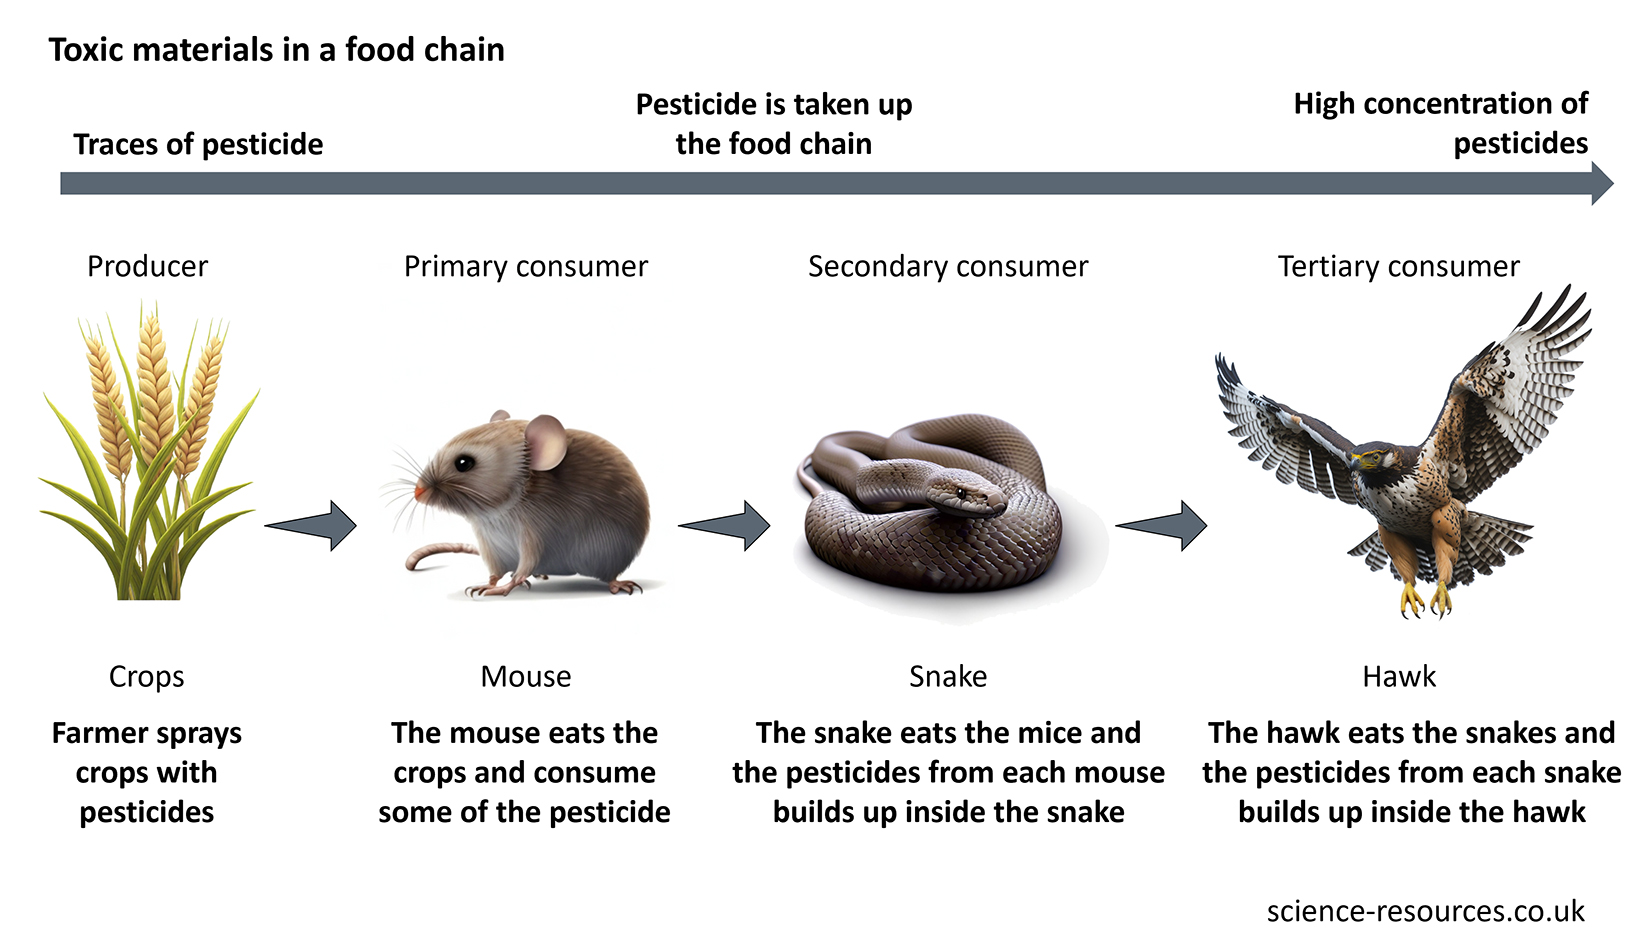 This image is a diagram illustrating the bioaccumulation of toxic materials, specifically traces of pesticide, in a food chain. It shows how pesticides sprayed on crops can accumulate in higher concentrations as they move up the food chain from producer to tertiary consumer. 